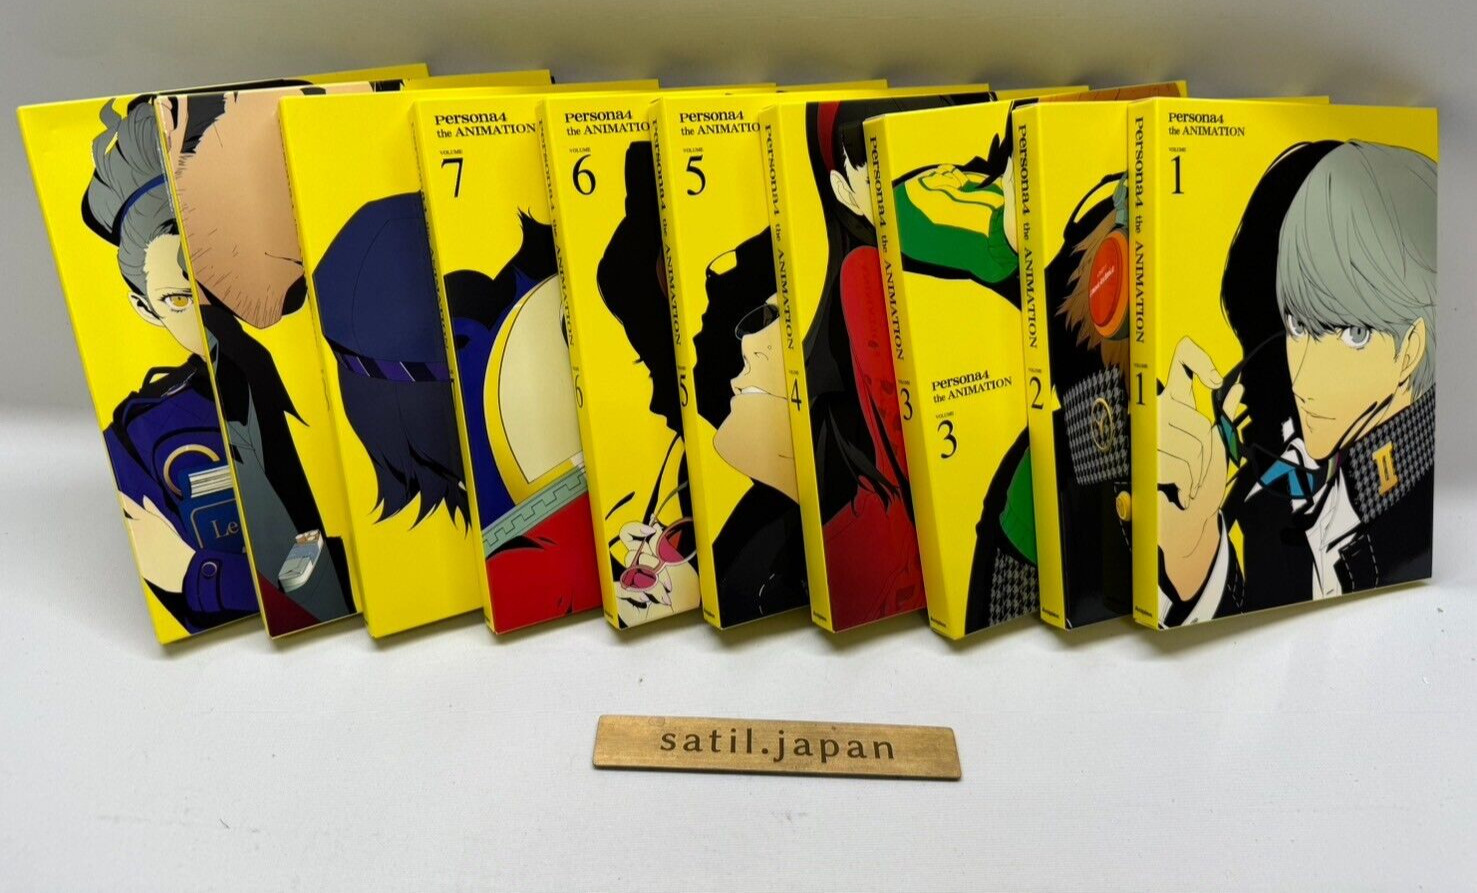 [USED] Persona 4 the ANIMATION Limited Edition DVD Vol 1-10 Complete set Japan